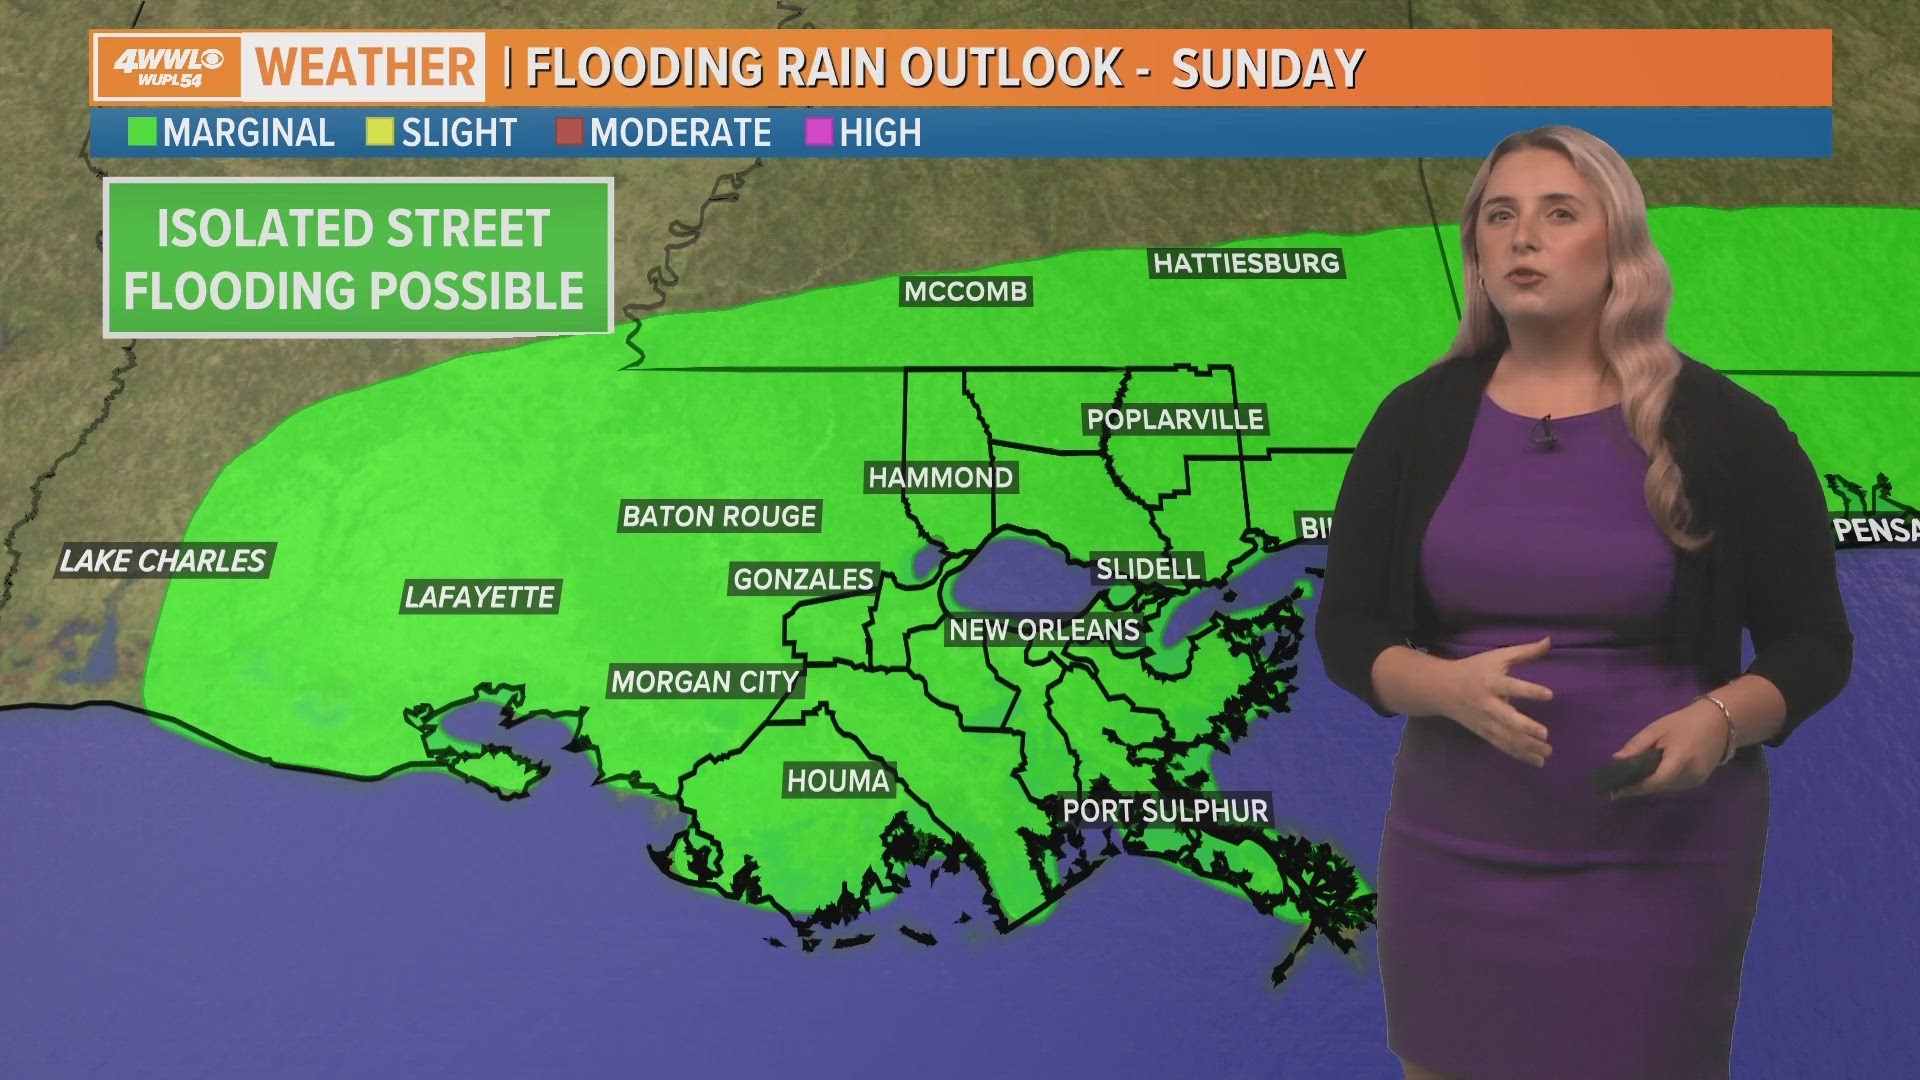 Meteorologist Alexa Trischler says one more day of heat before relief and rain come this weekend.